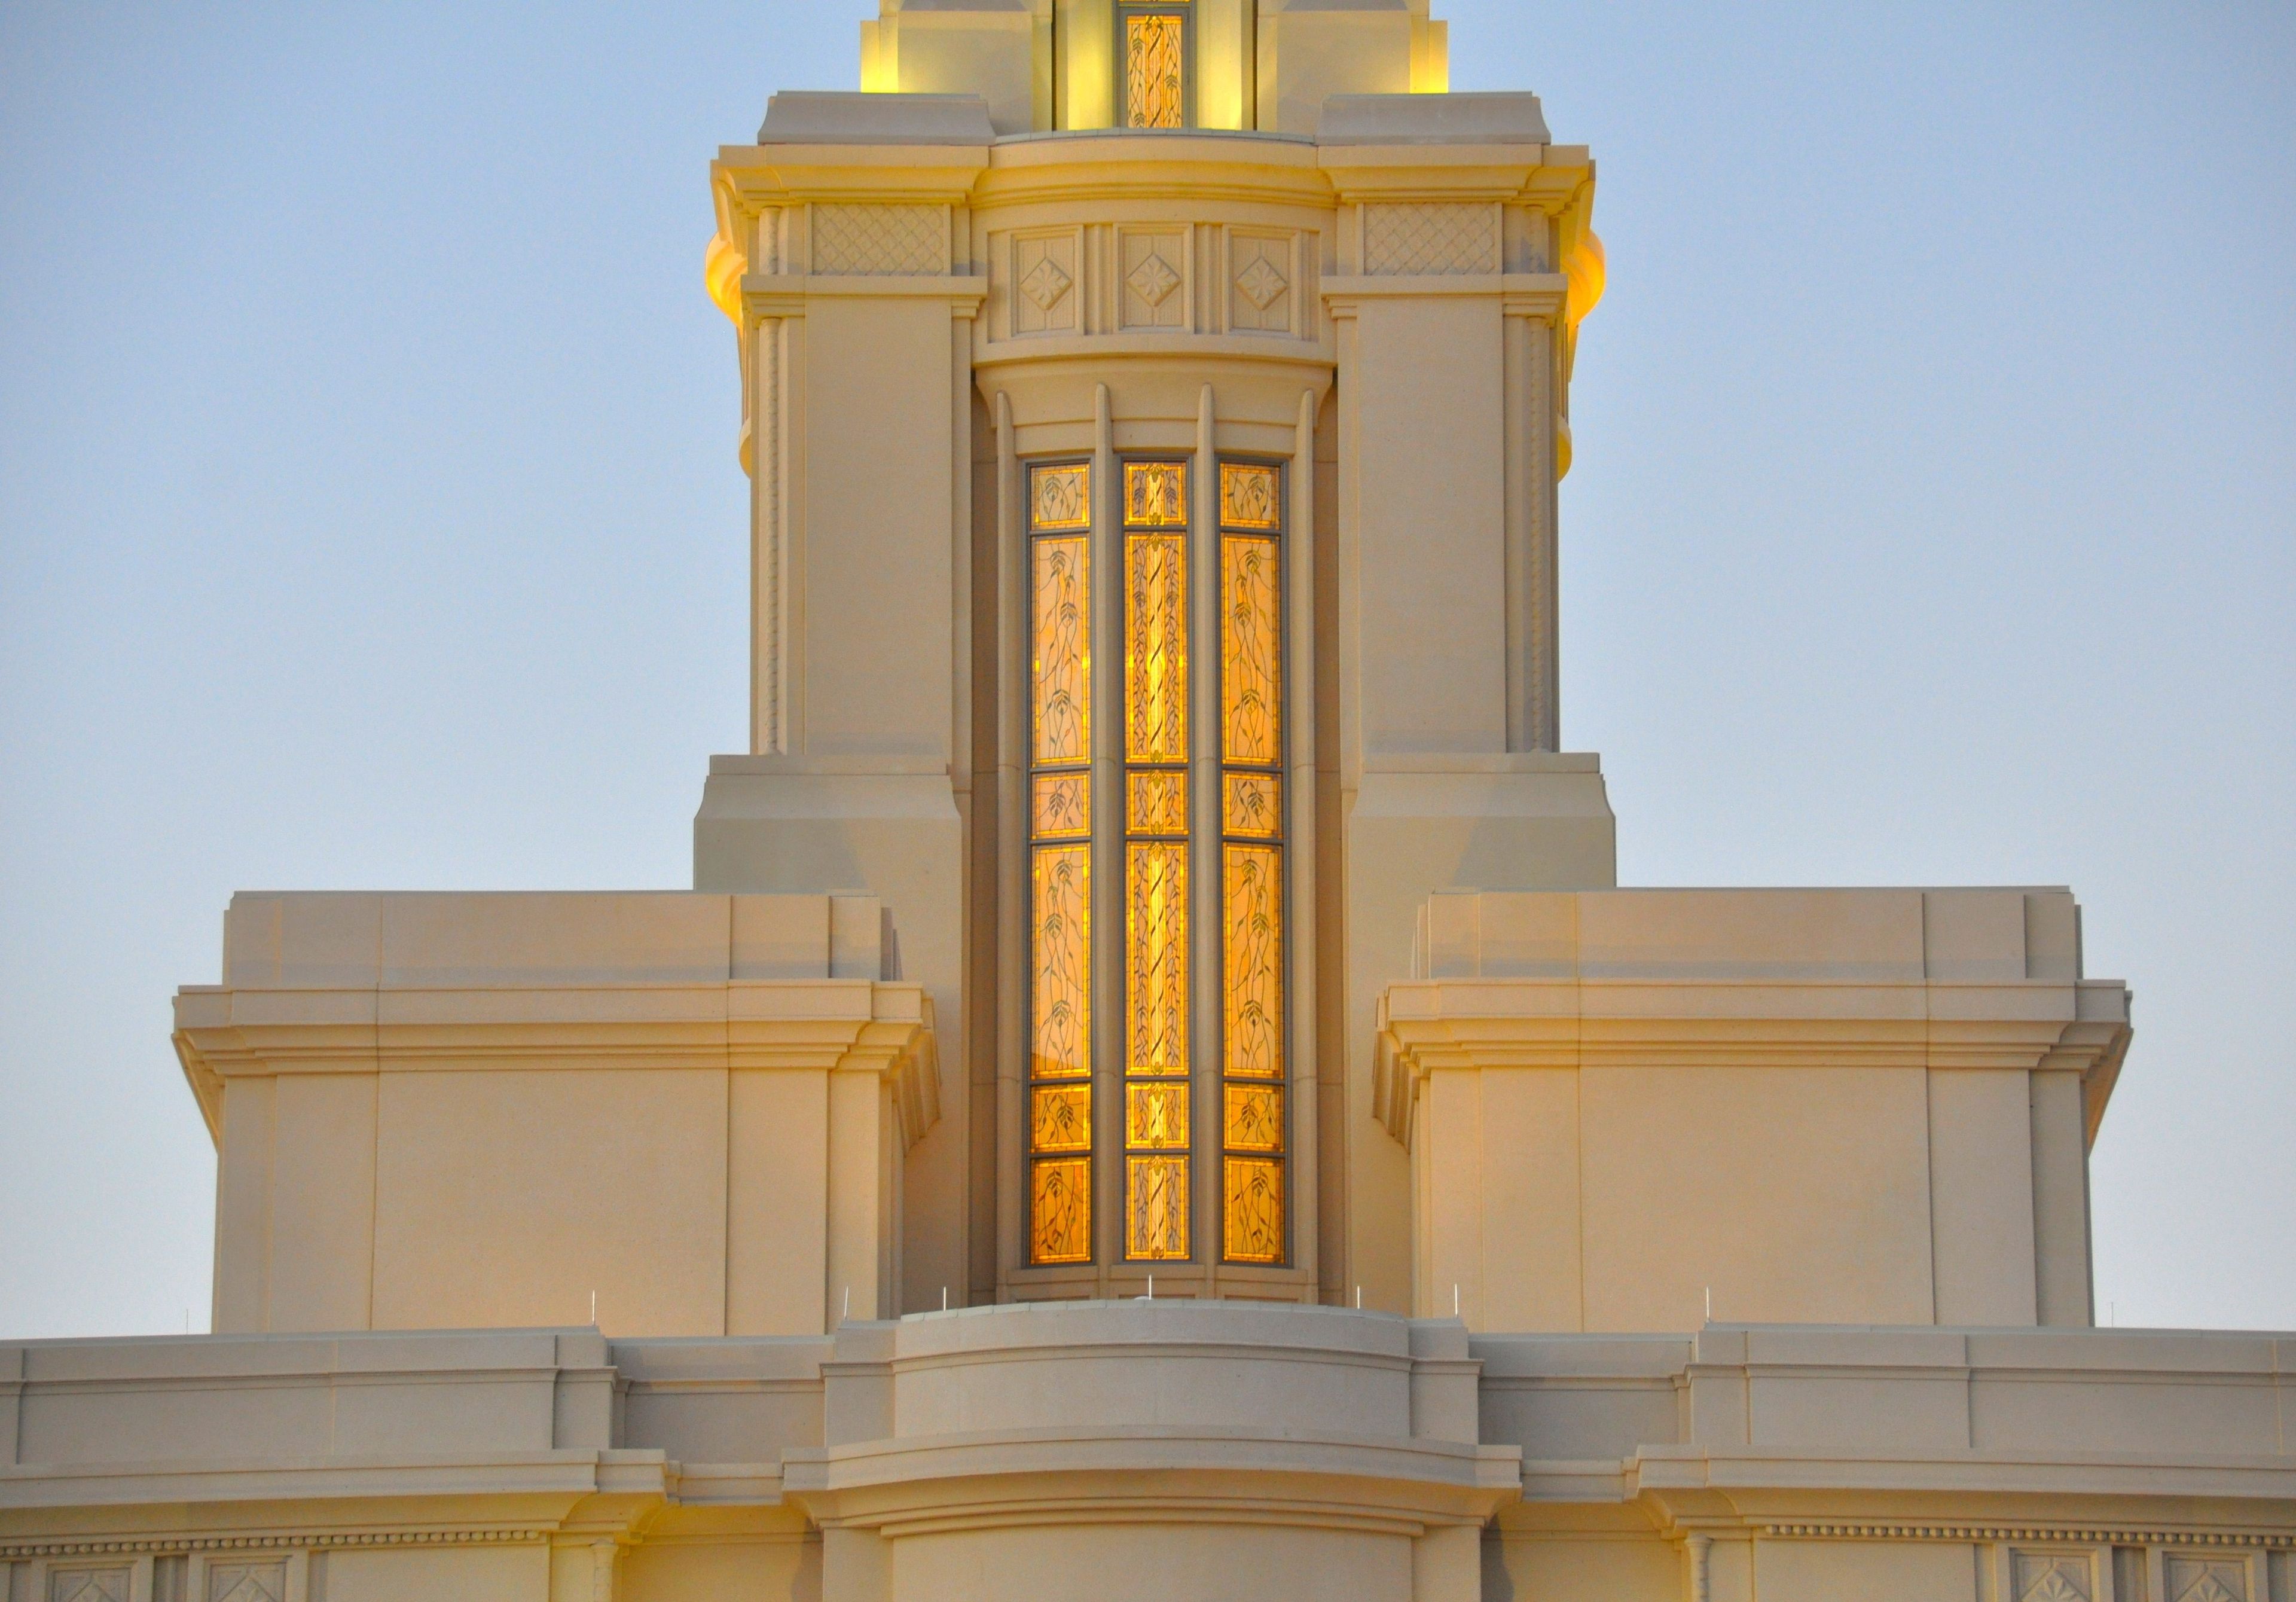 A view of a window on the spire of the Payson Utah Temple.